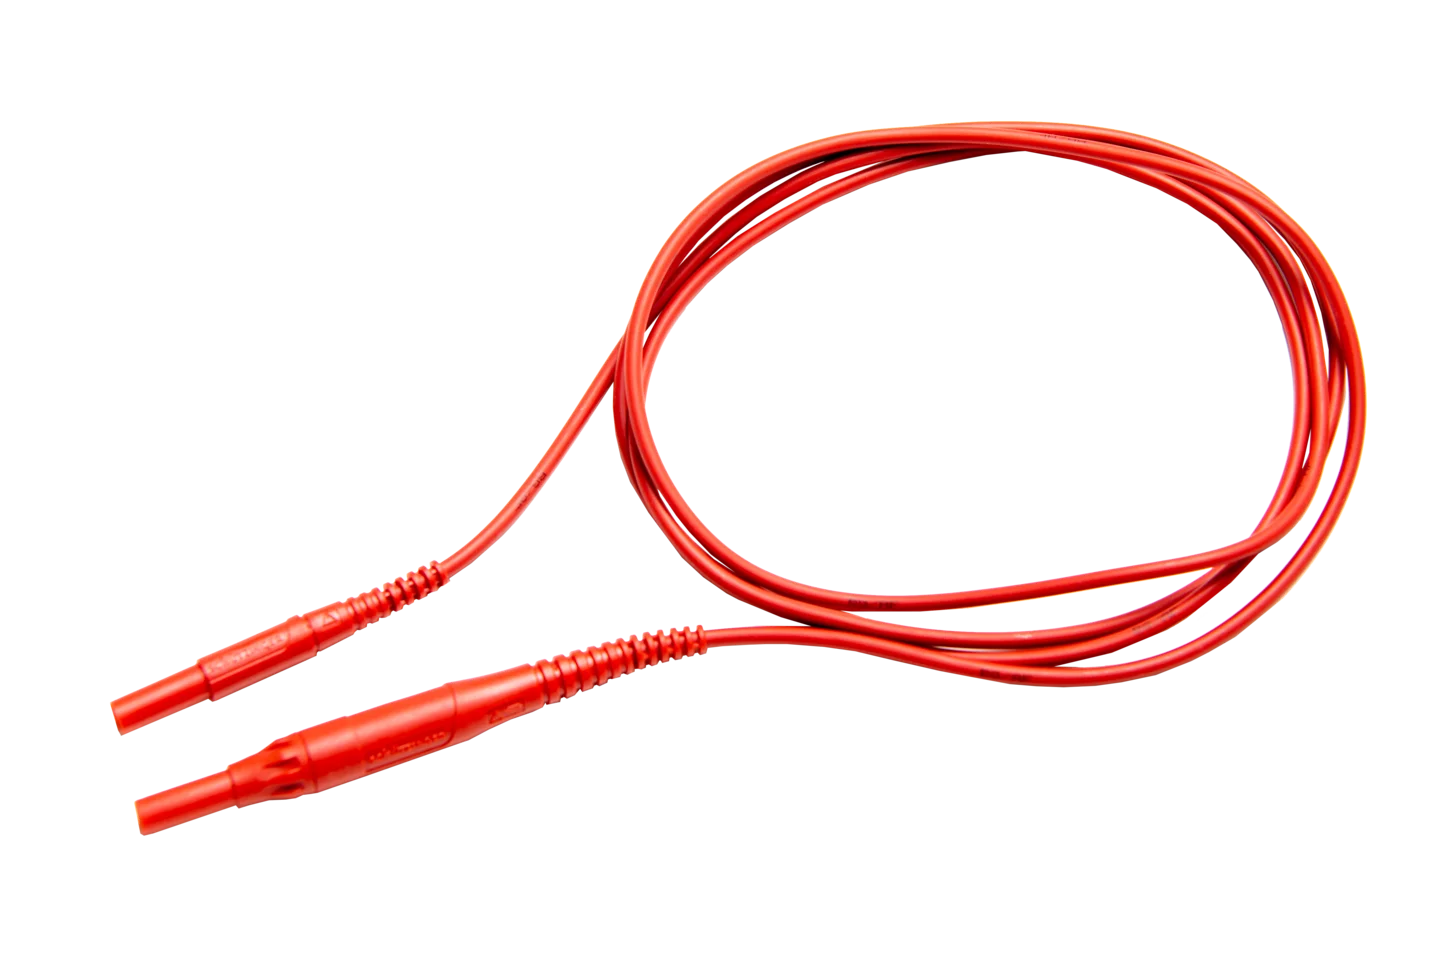 Test lead 2 m CAT IV 1000V (banana plugs, fused 10 A) red